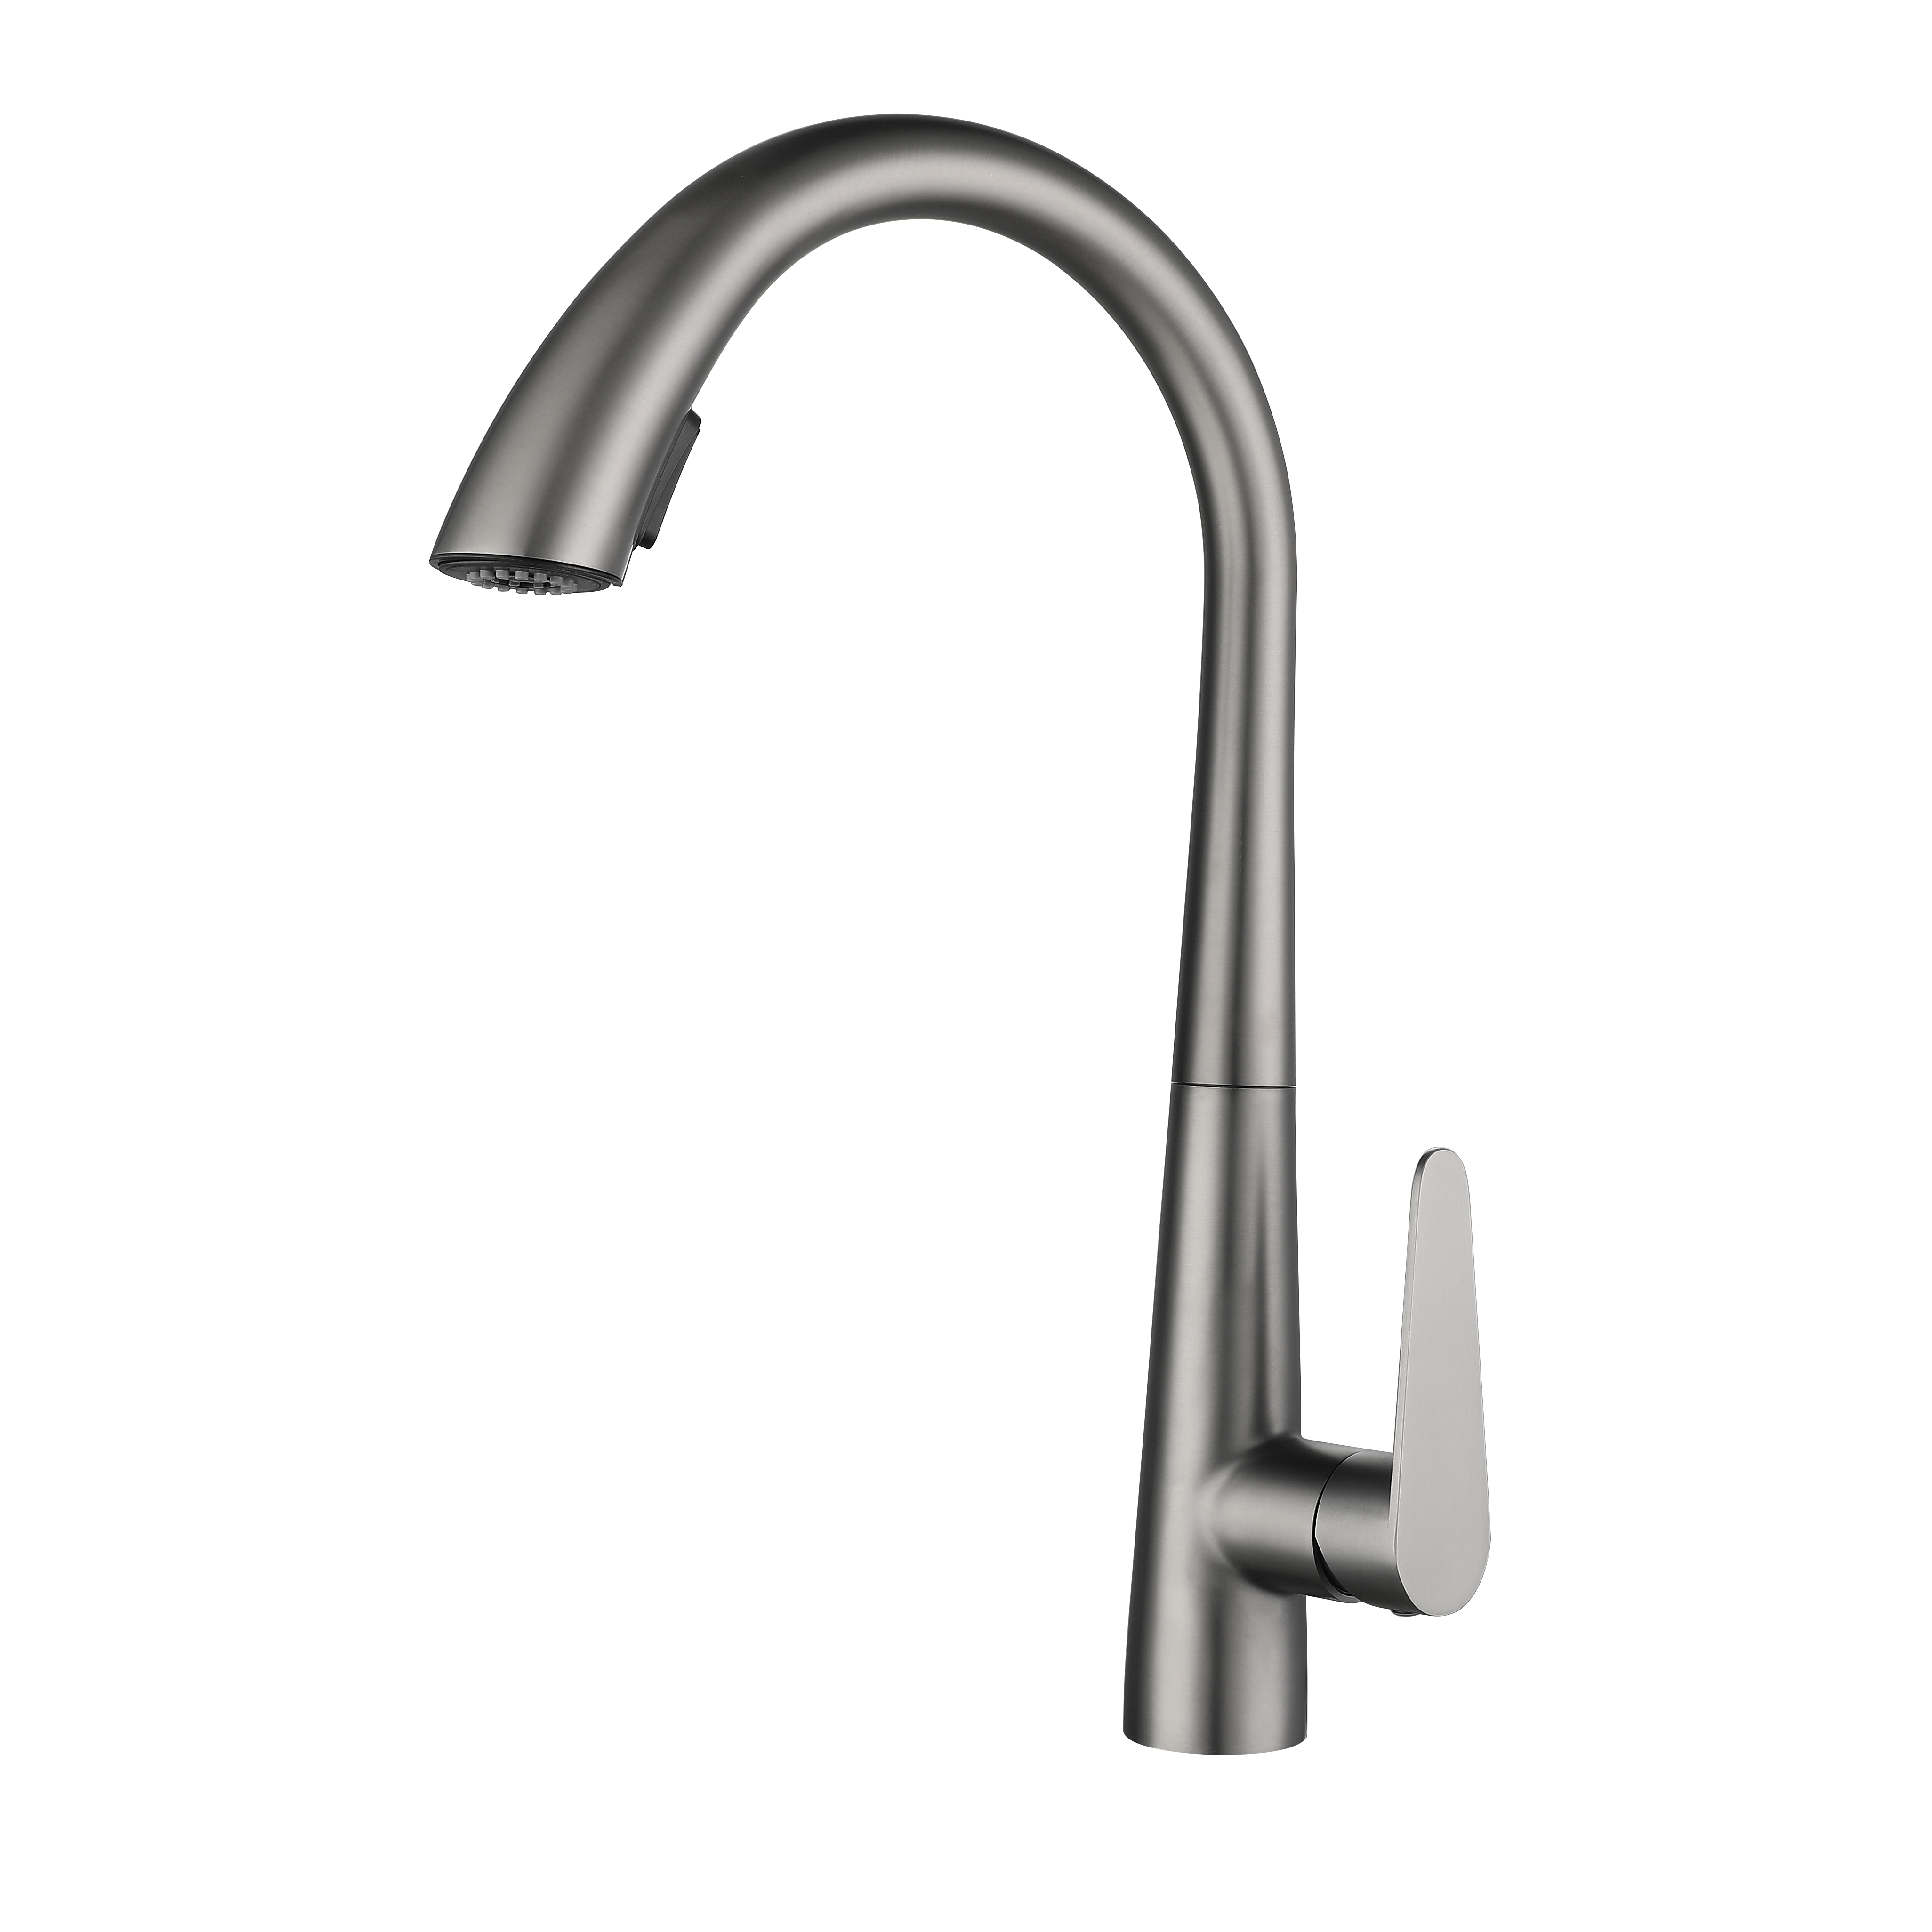 Faucet Manufacturers - China Faucet Factory & Suppliers